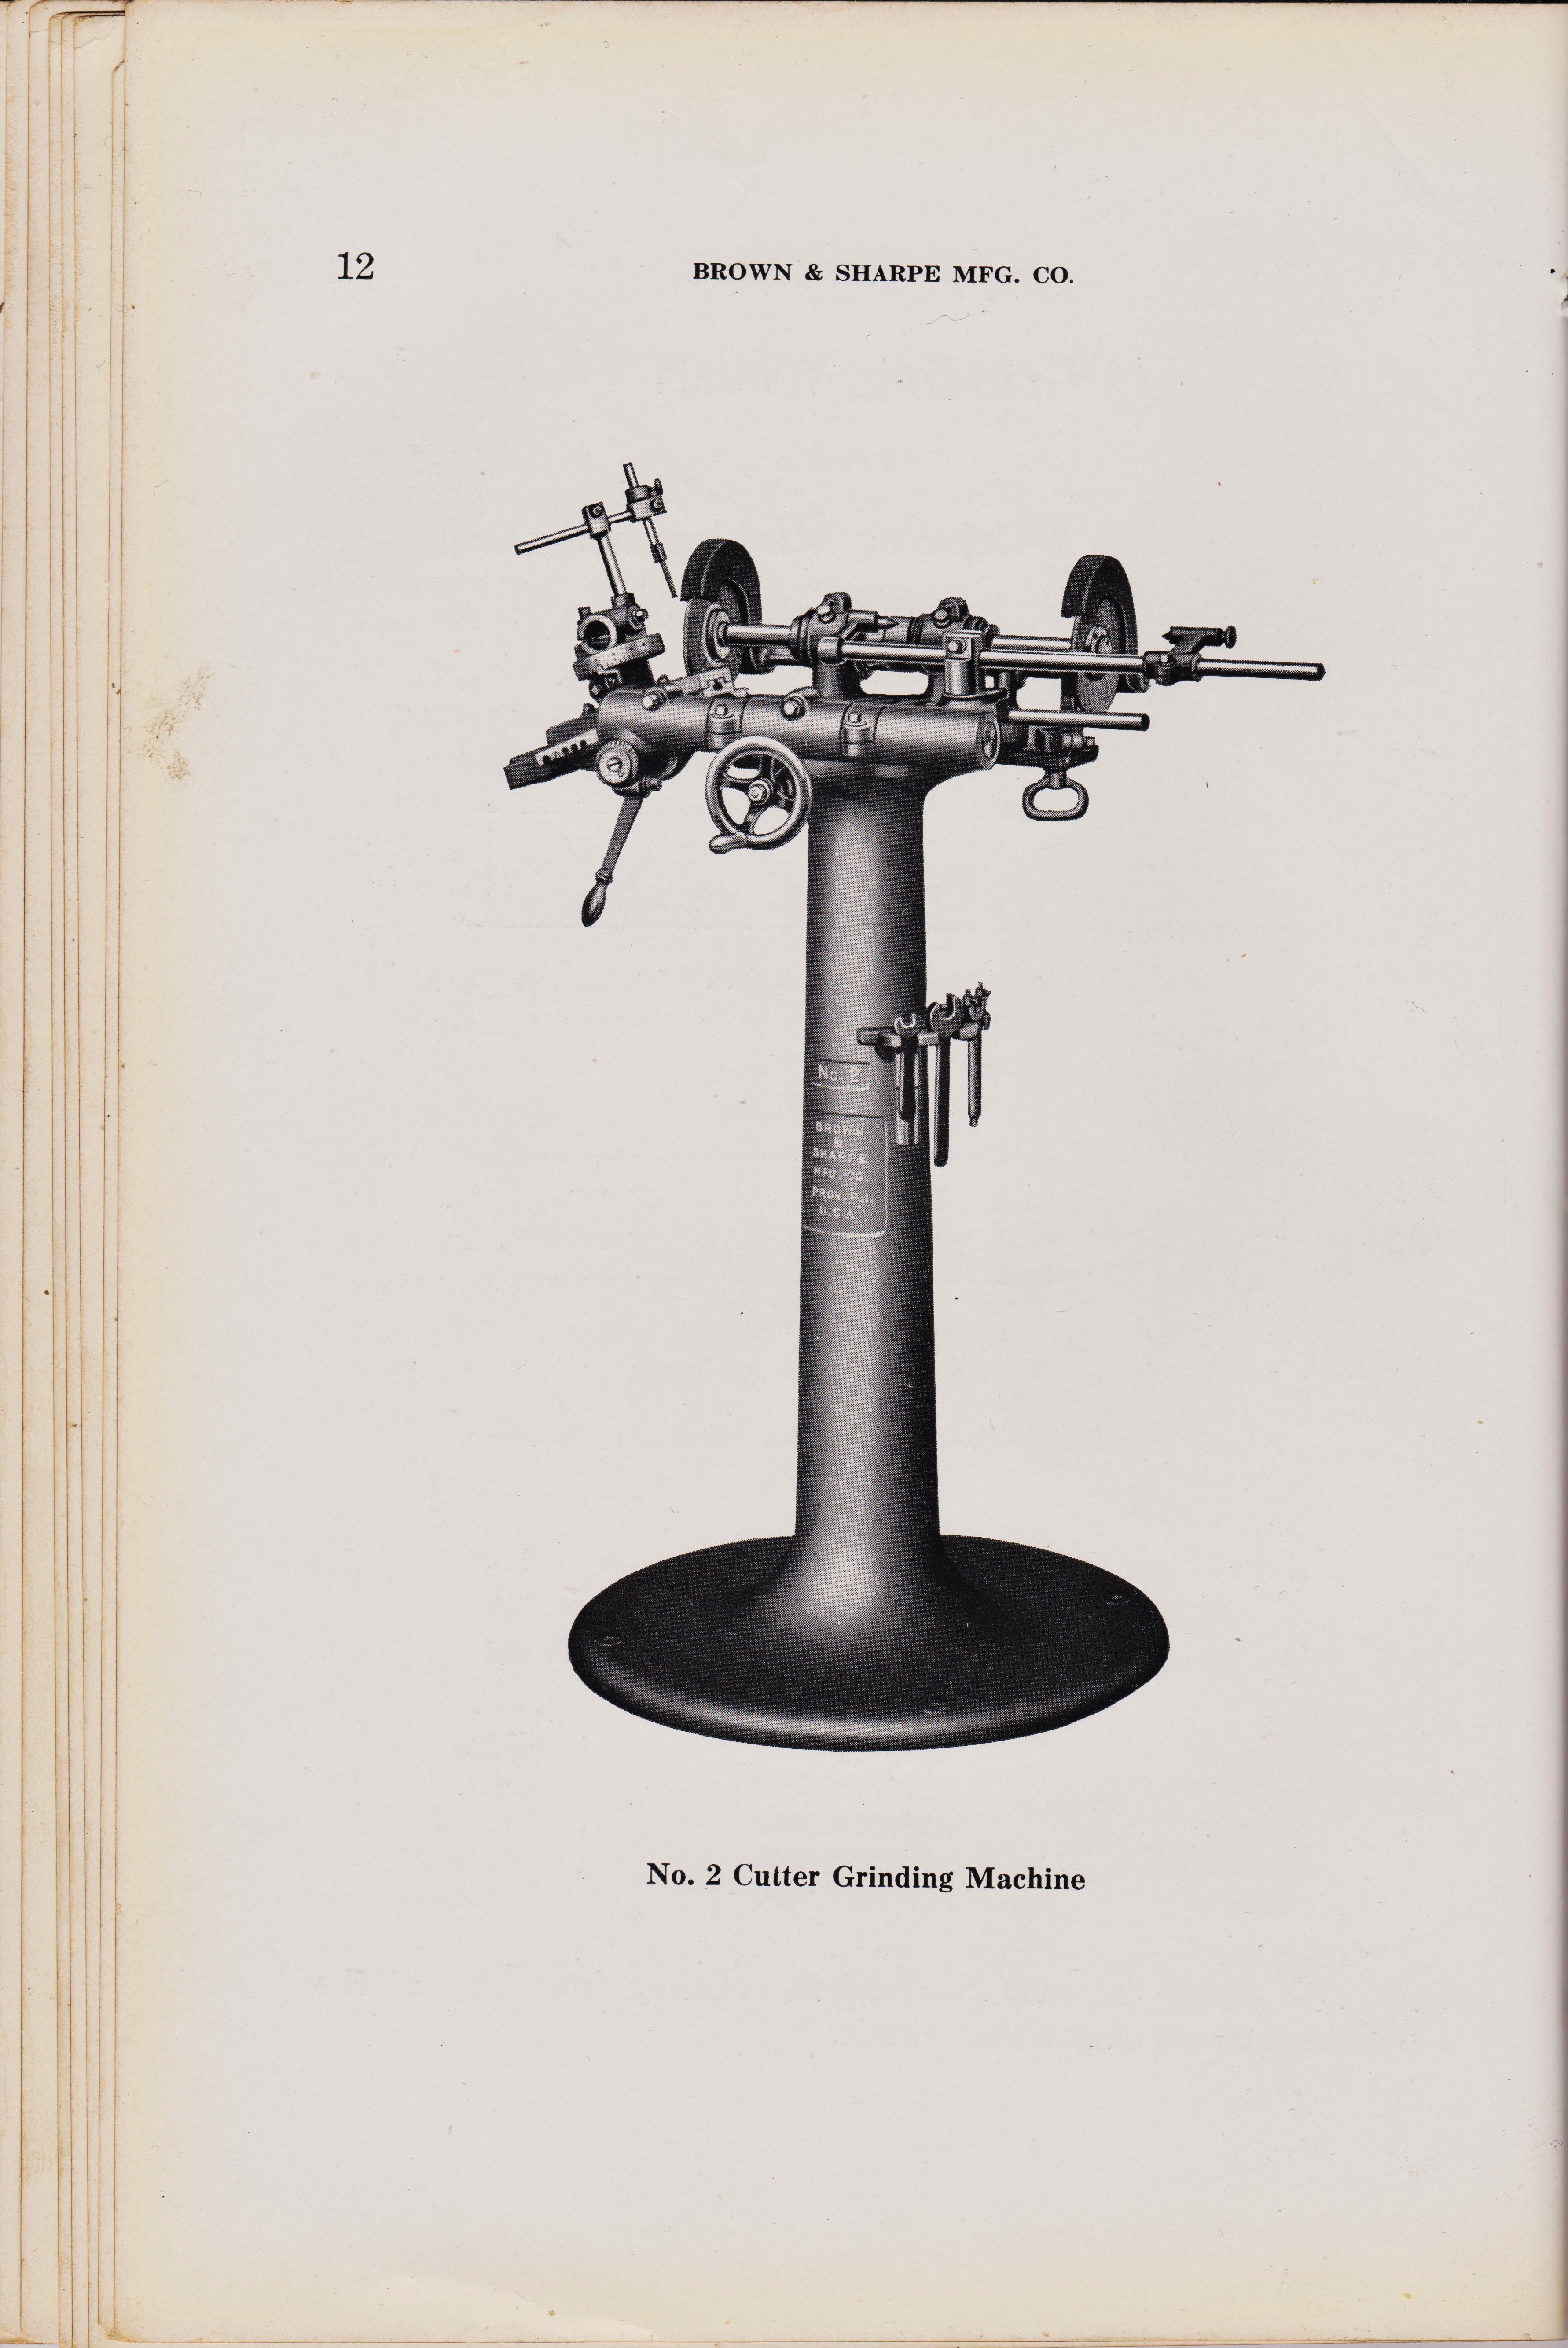 https://antiquemachinery.com/images-2020/Universal-Cutter-and-Reamer-Grinder-Machine-Brown-and-Sharpe-Mfg-Co-1929-No2-No3-pg-12.jpeg